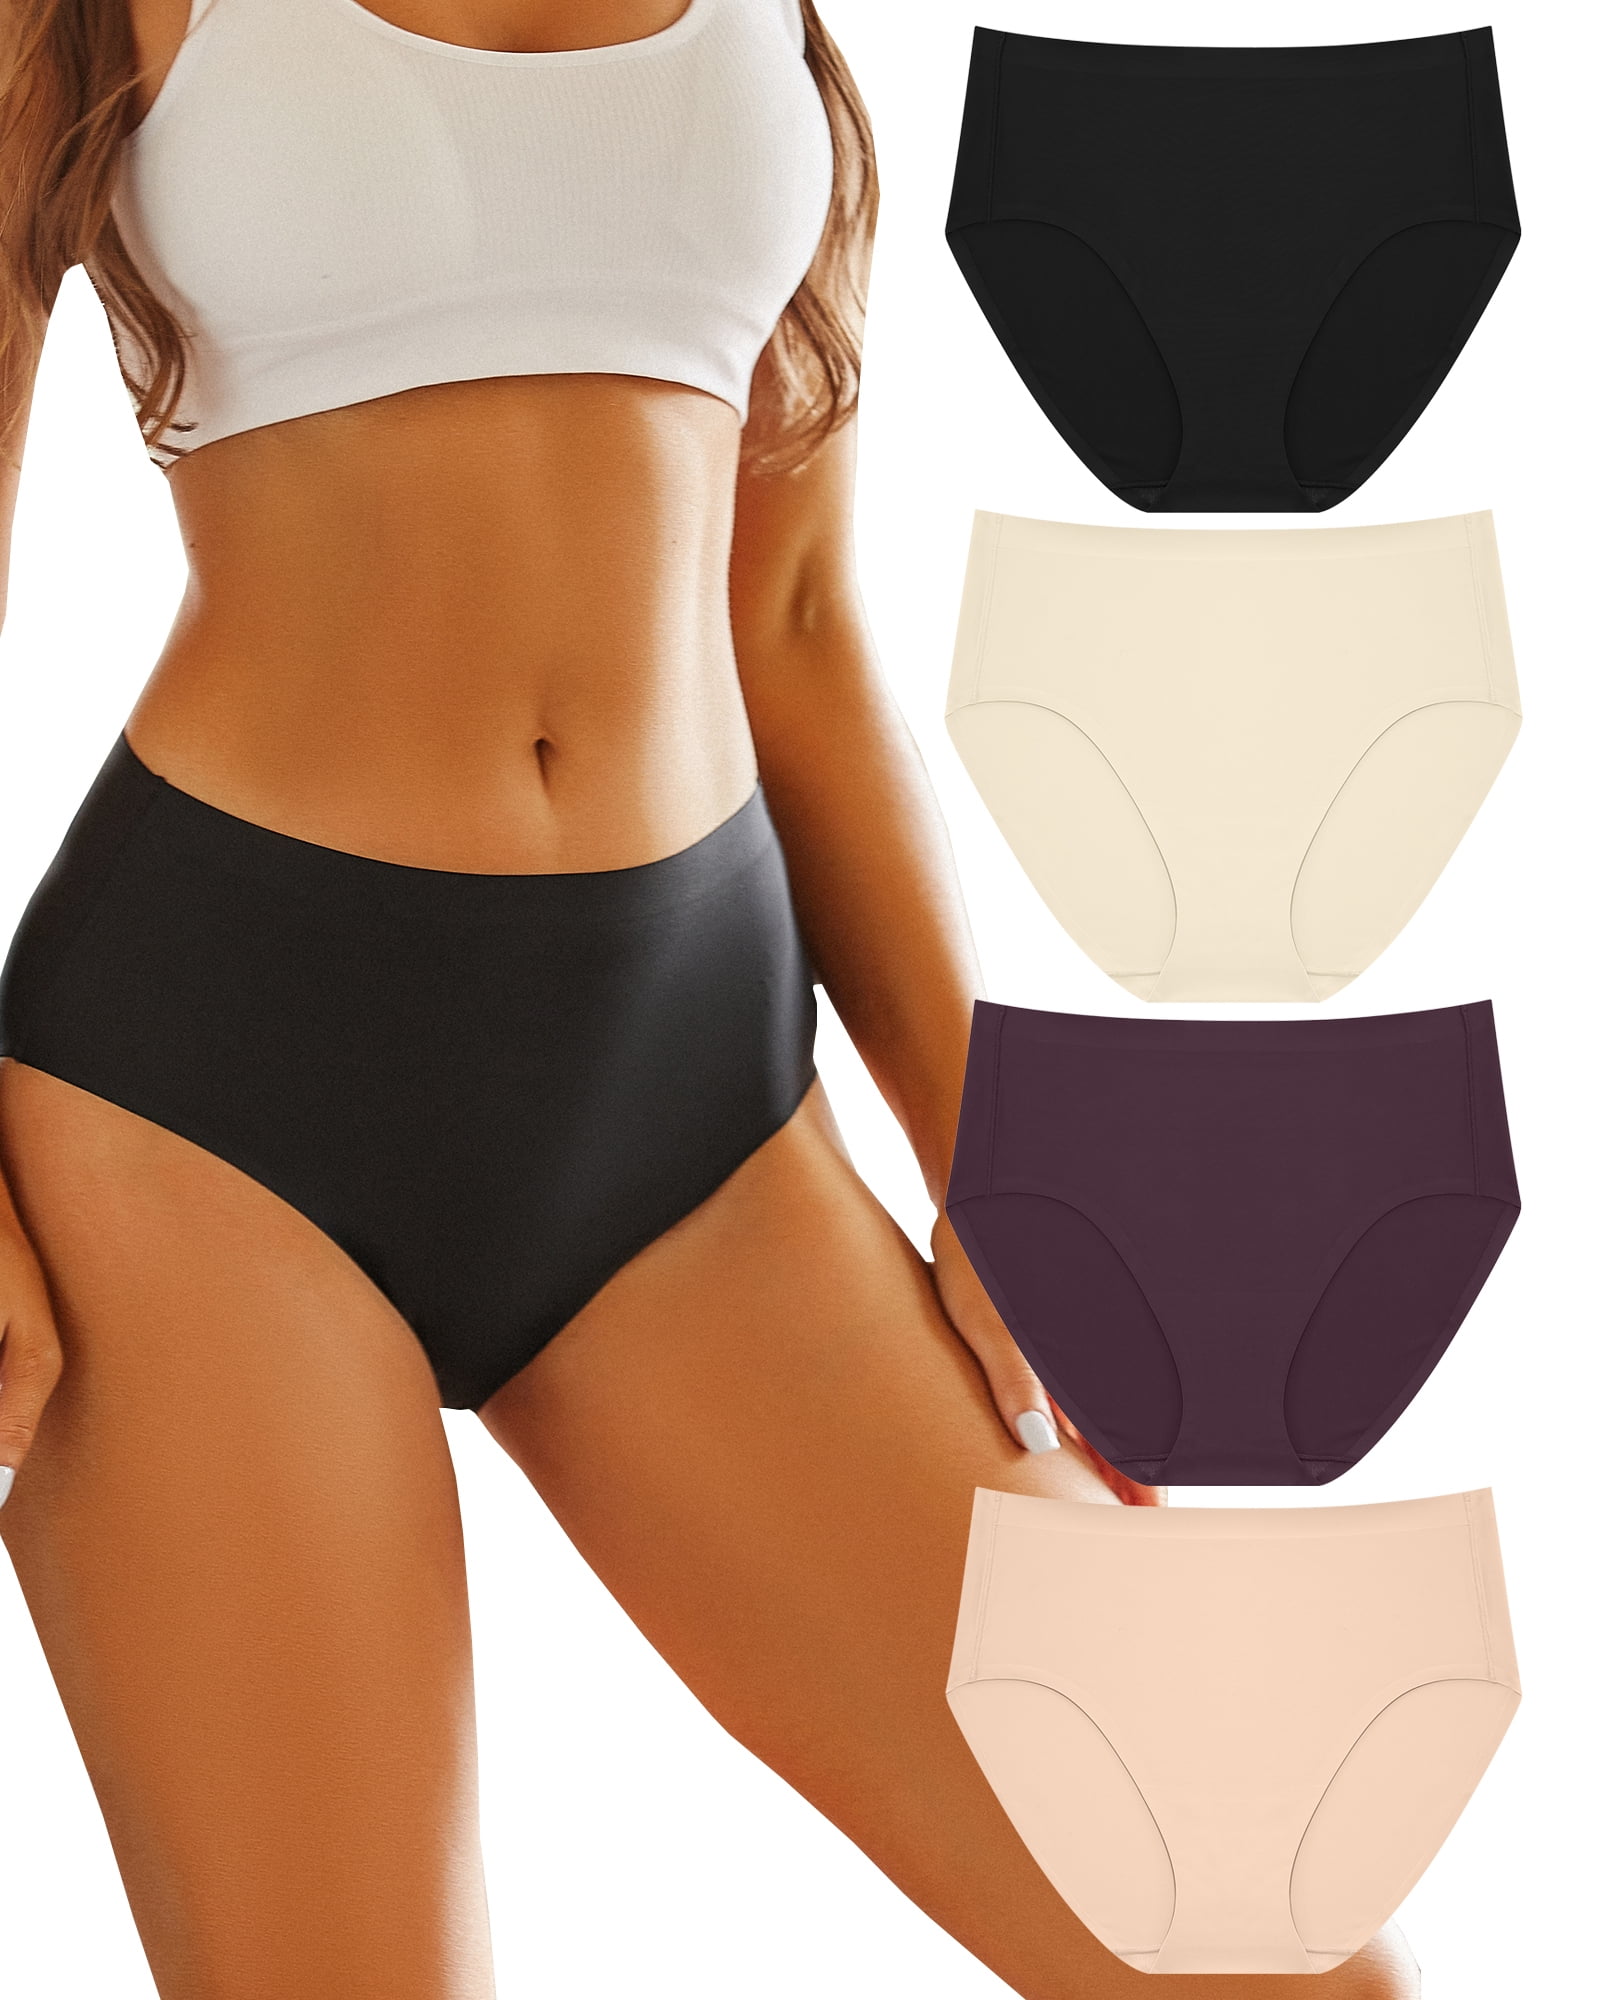 Finetoo 4 Pack Plus Size Underwear for Women Seamless High Waist Panties  Soft Stretch Invisible No Show Briefs M-3XL 